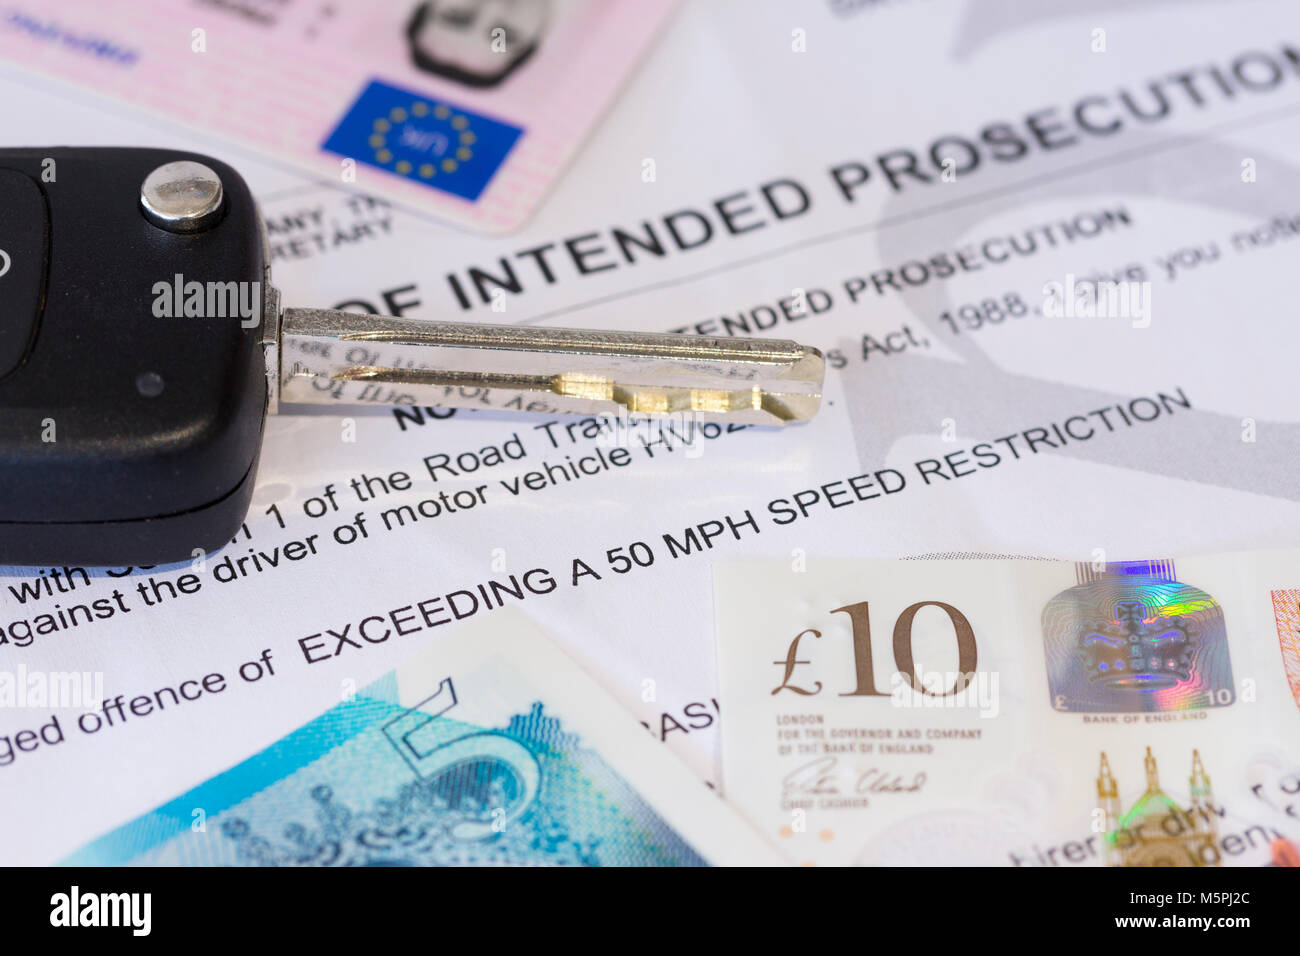 A notice of intended prosecution for exceeding a speed limit - concept, speeding Stock Photo